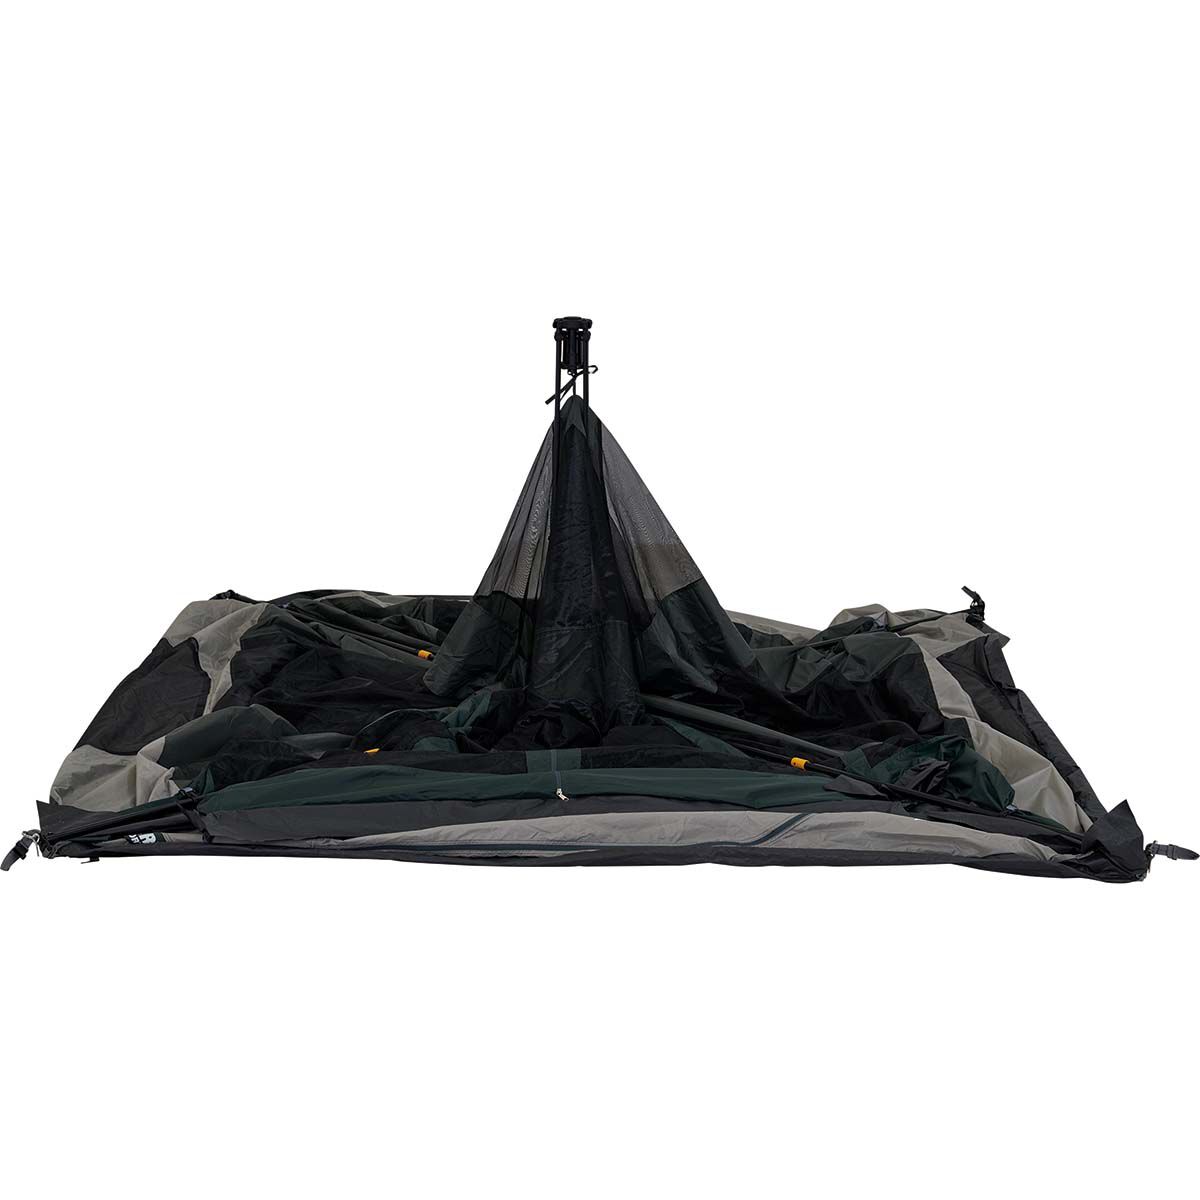 OZtrail BlockOut Fast Frame 4 Person Cabin Tent | BCF